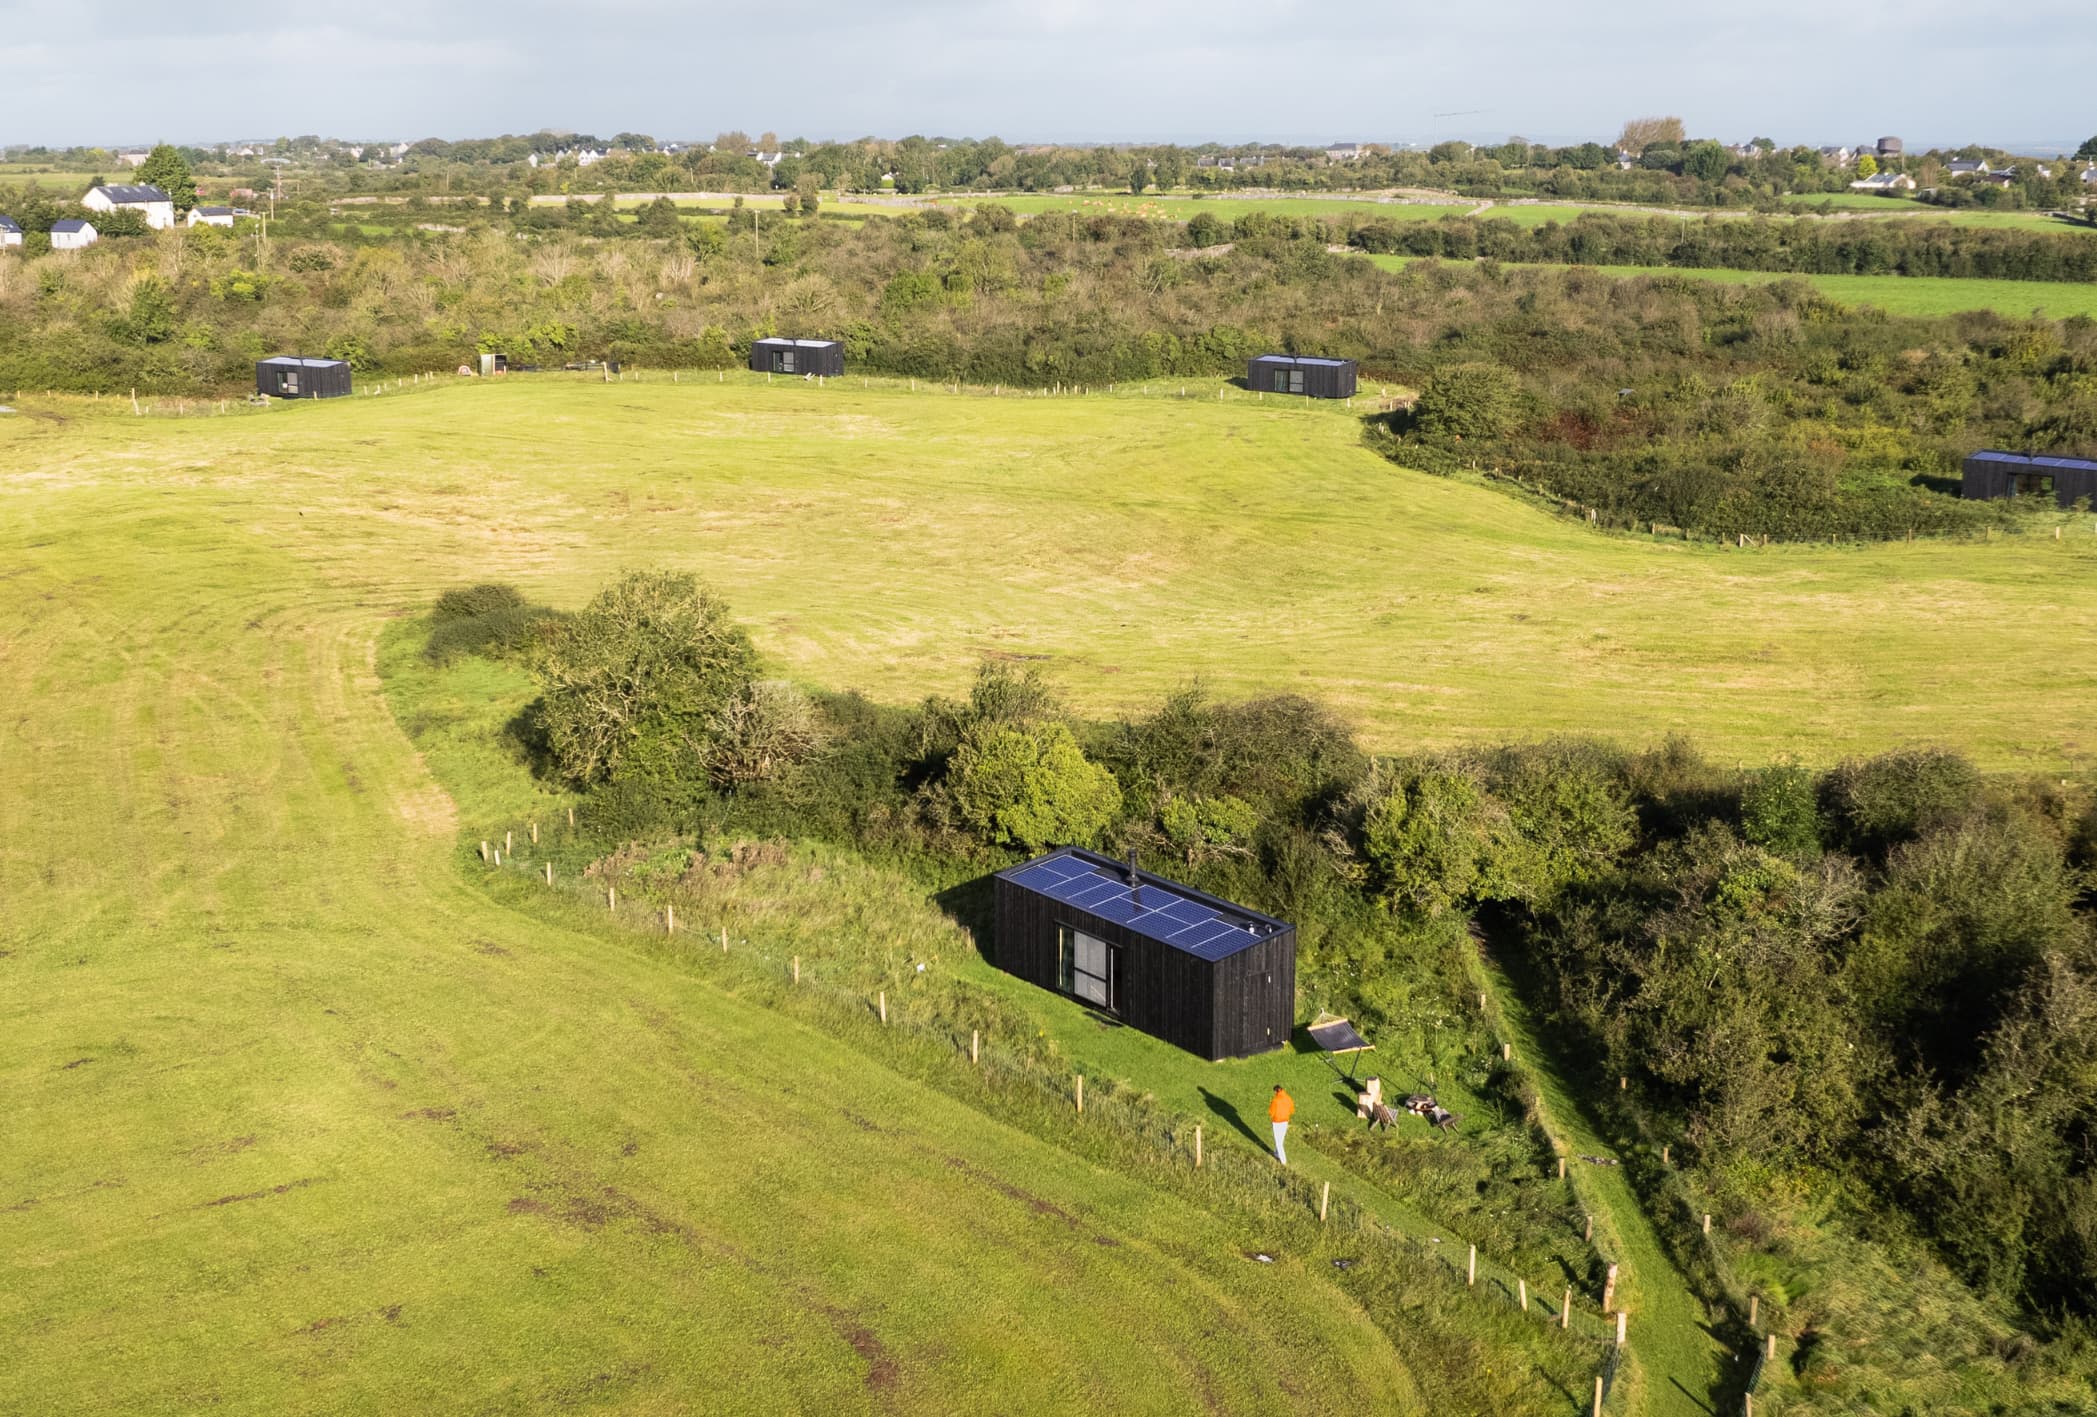 drone shot of cabins in a field